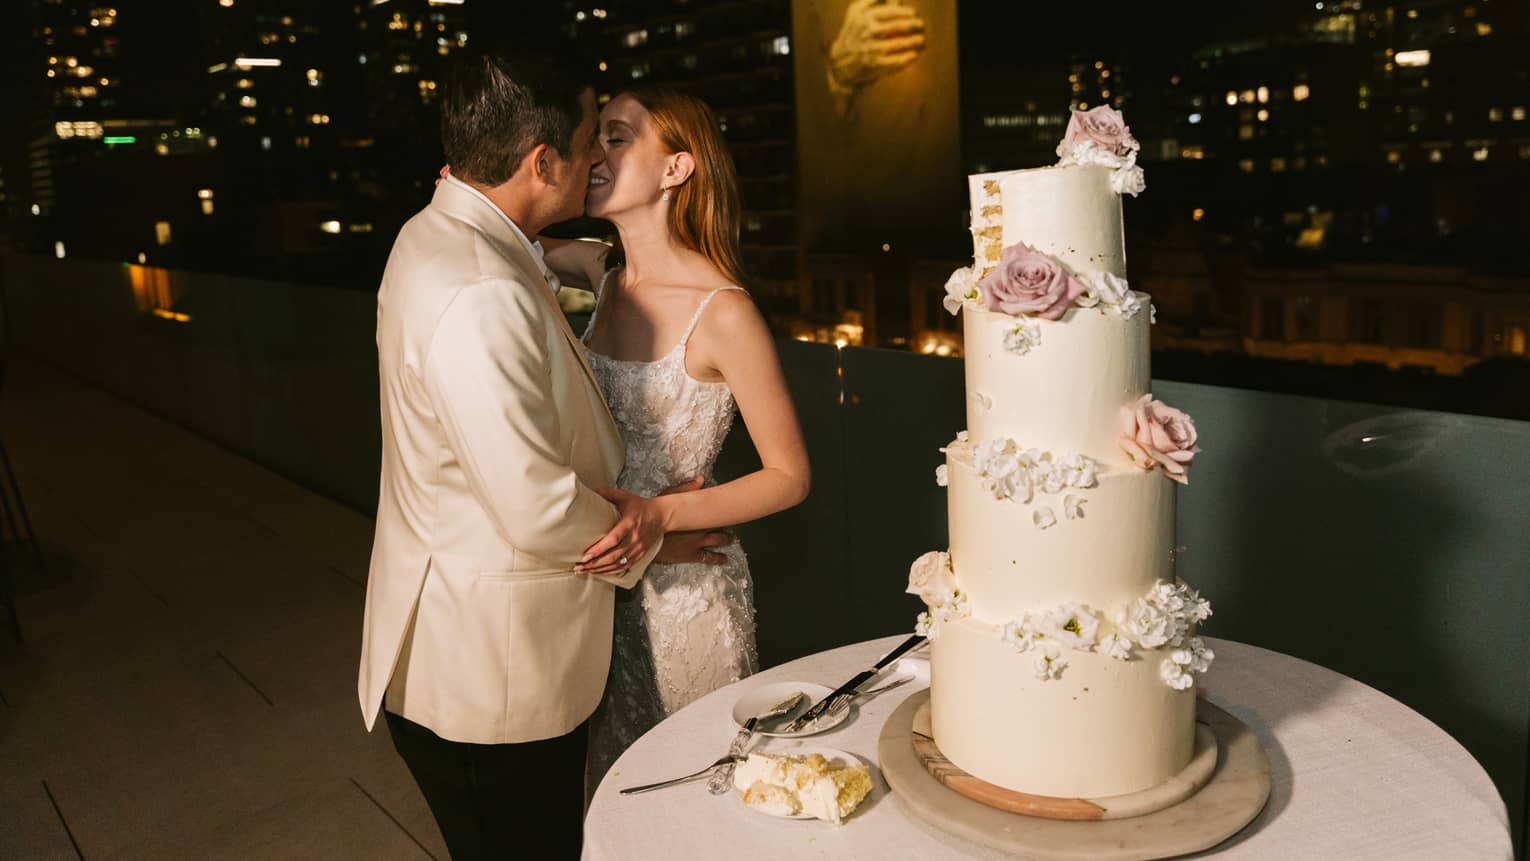 Woman wearing white sleeveless wedding dress and man wearing white tuxedo coat and black pants kiss on a rooftop terrace next to a wedding cake